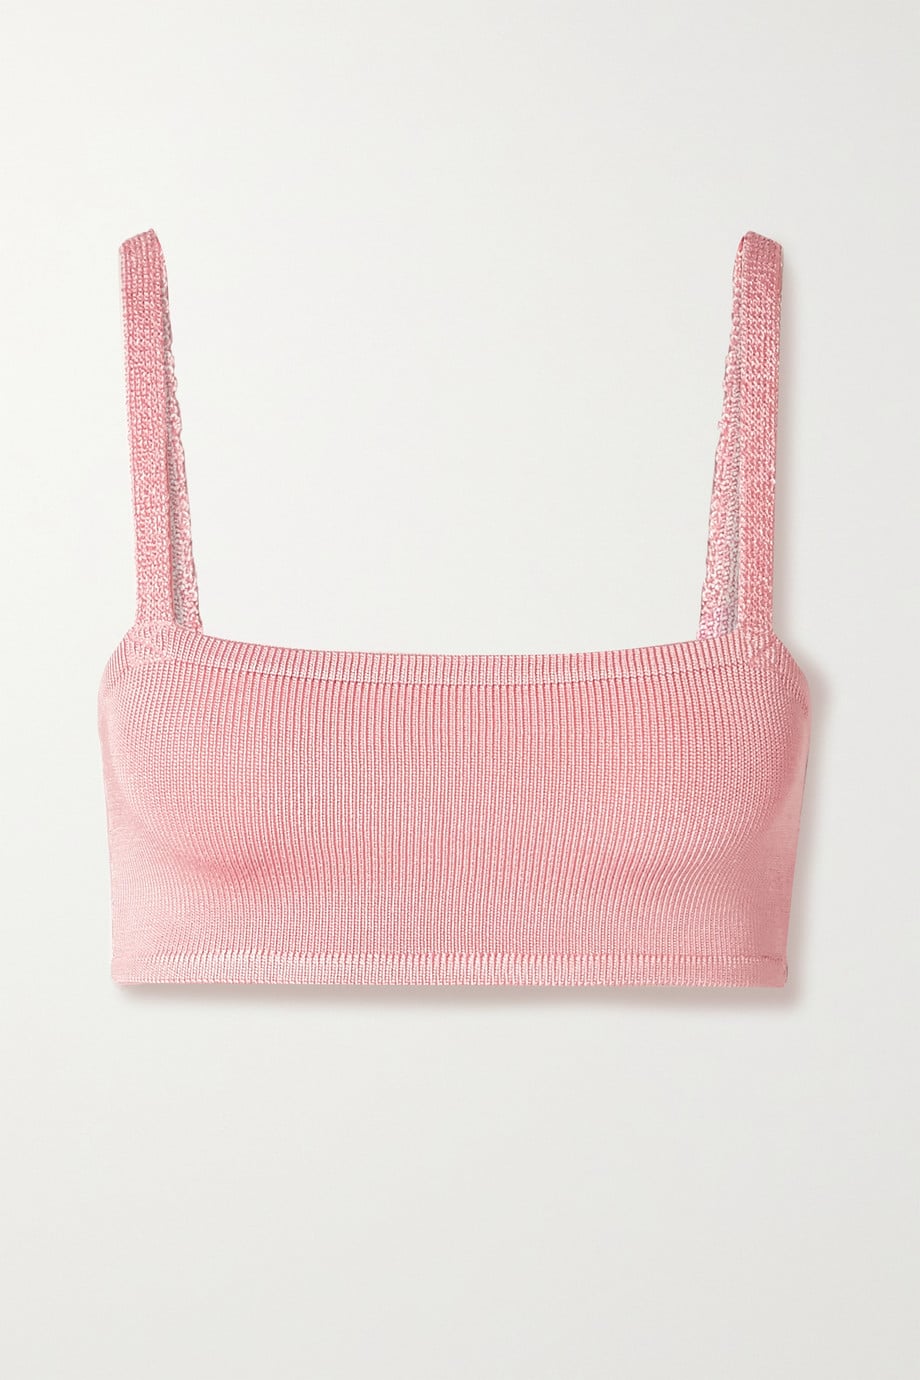 Calle Del Mar Baby pink + NET SUSTAIN cropped stretch-knit bra top, The Bra -Top Trend Is Officially a Thing— Here Are 5 Easy Ways to Give It a Try